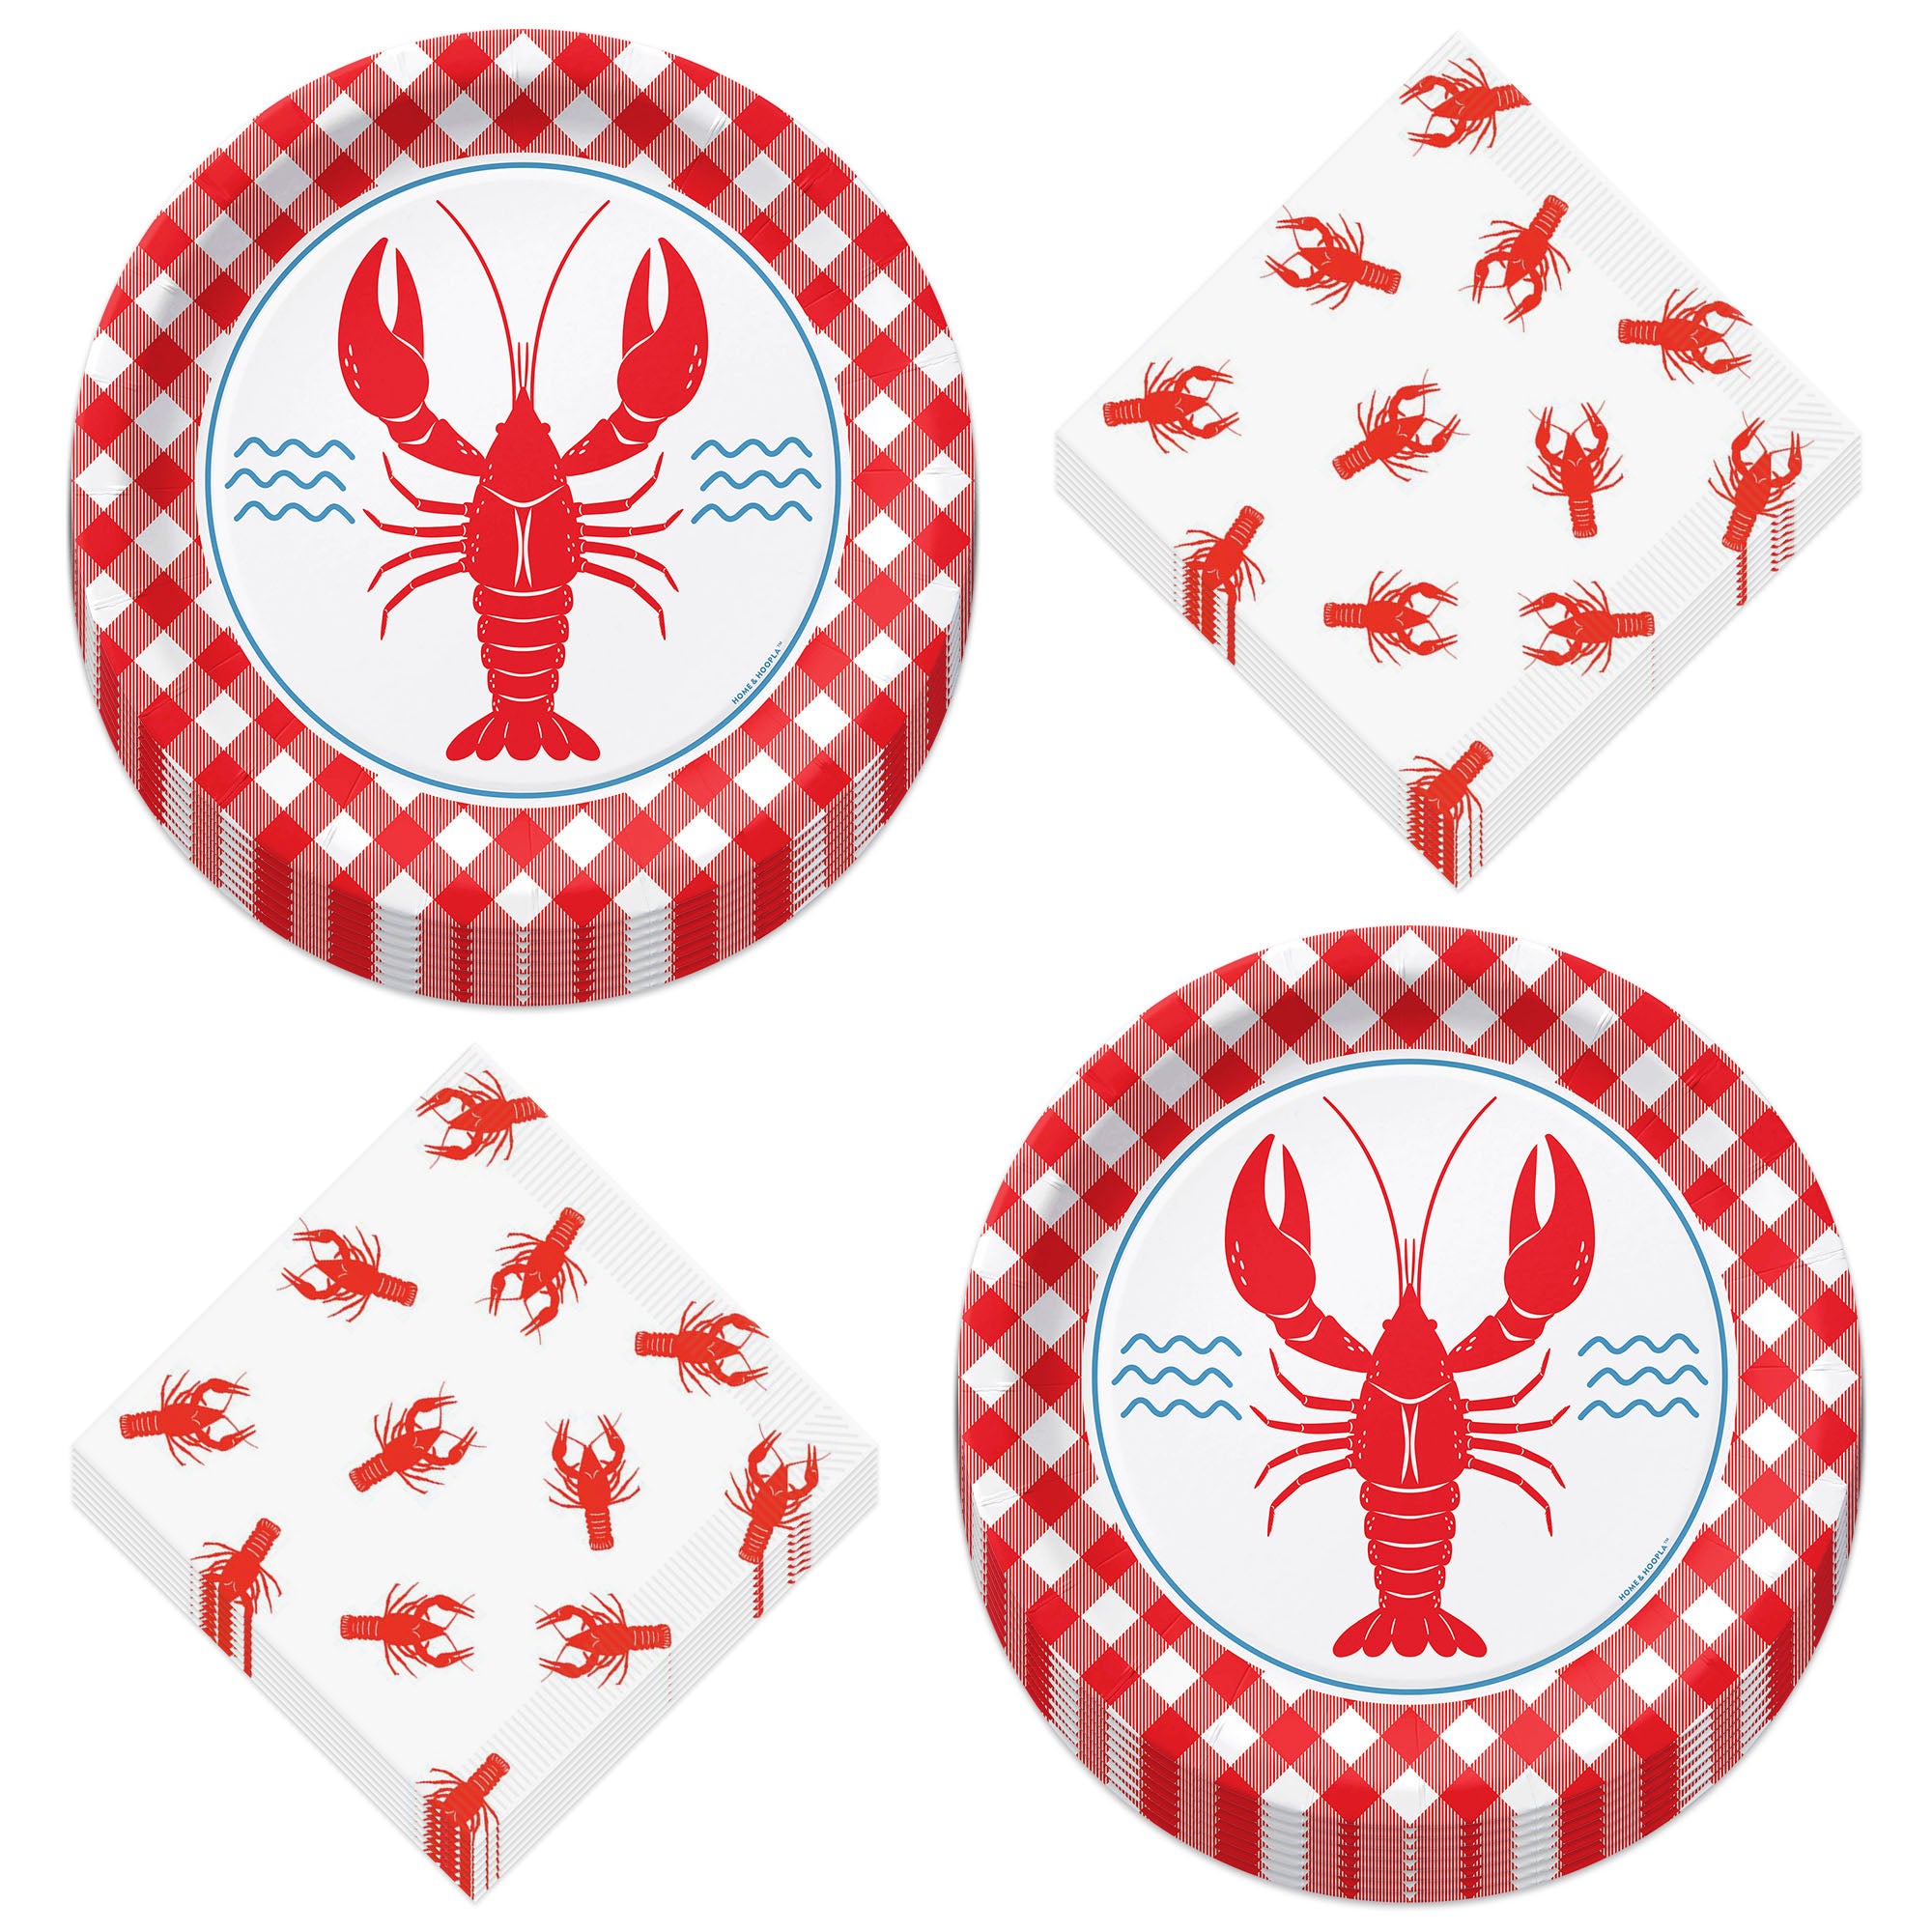  Xigejob Crawfish Boil Party Supplies - Lobster Boil Party  Decorations Tableware, Plate, Cup, Napkin, Tablecloth, Cutlery, Crayfish Crab  Seafood Boil Party Supplies For Birthday Baby Shower